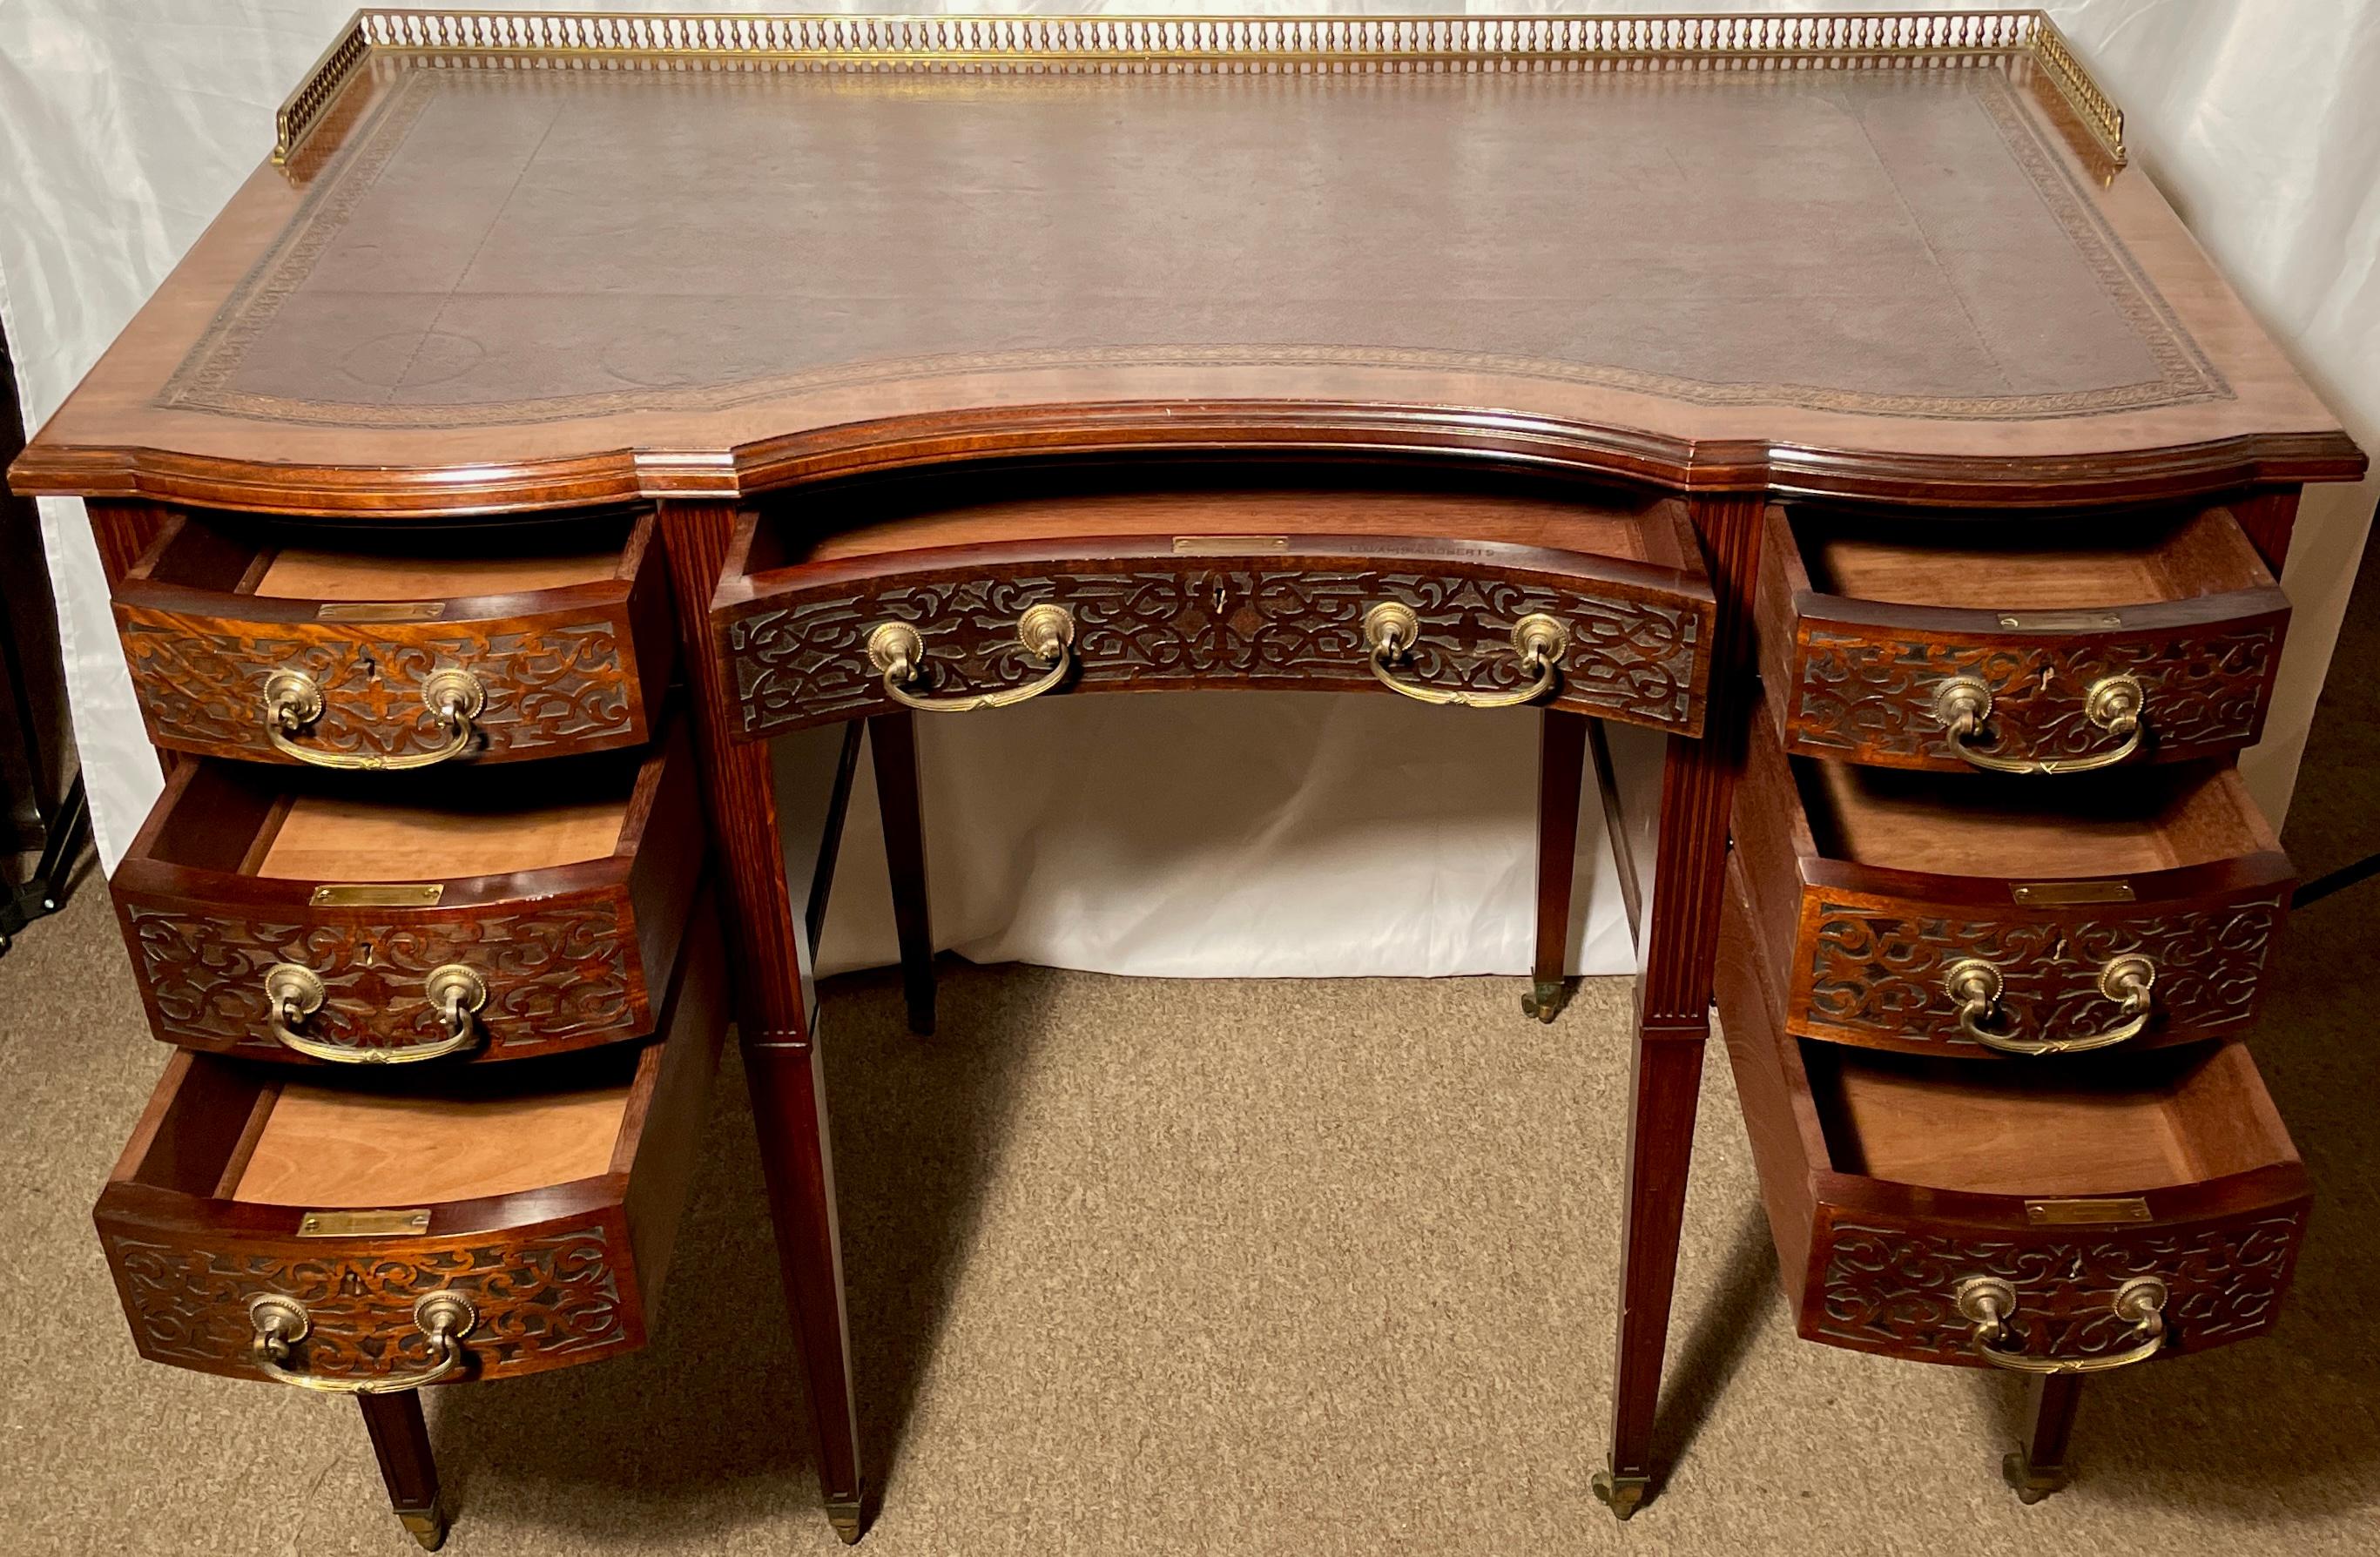 Antique English Mahogany Writing Desk with Chippendale Fretwork, circa 1880 In Good Condition For Sale In New Orleans, LA